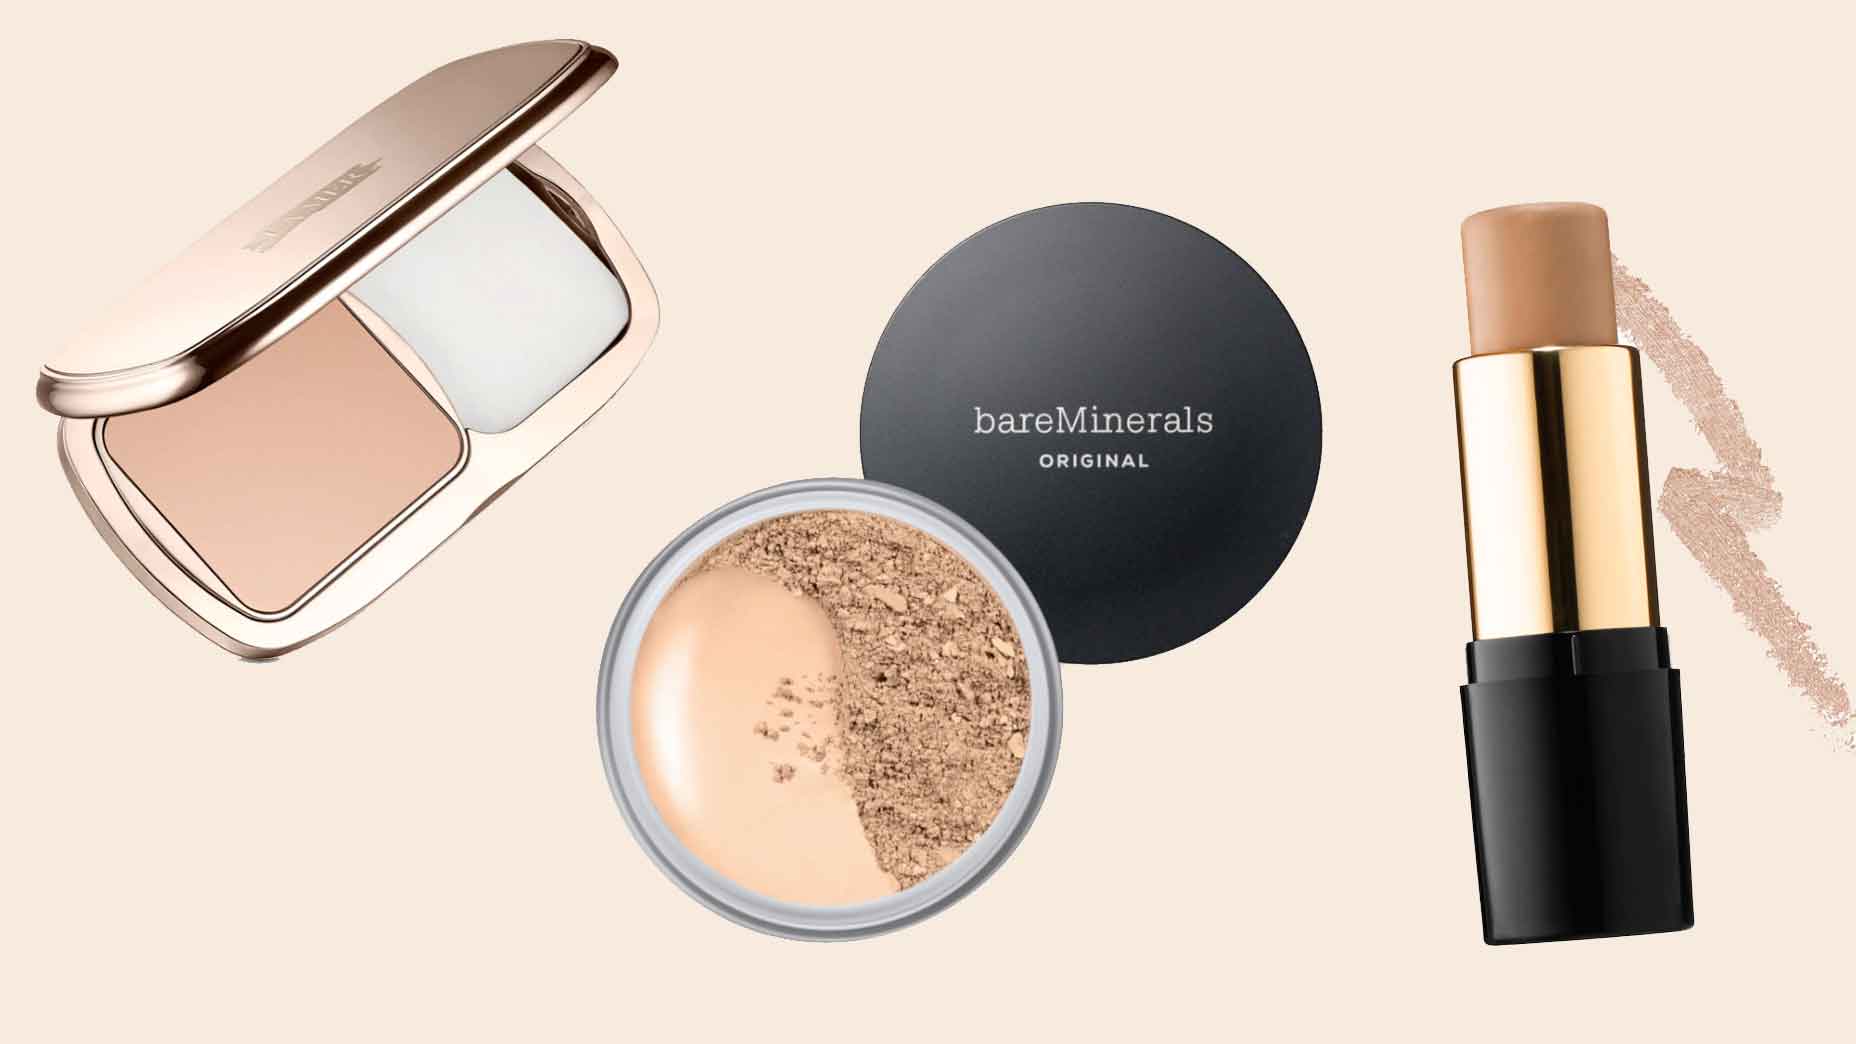 These 4 long-lasting foundations with SPF are perfect for a round of golf